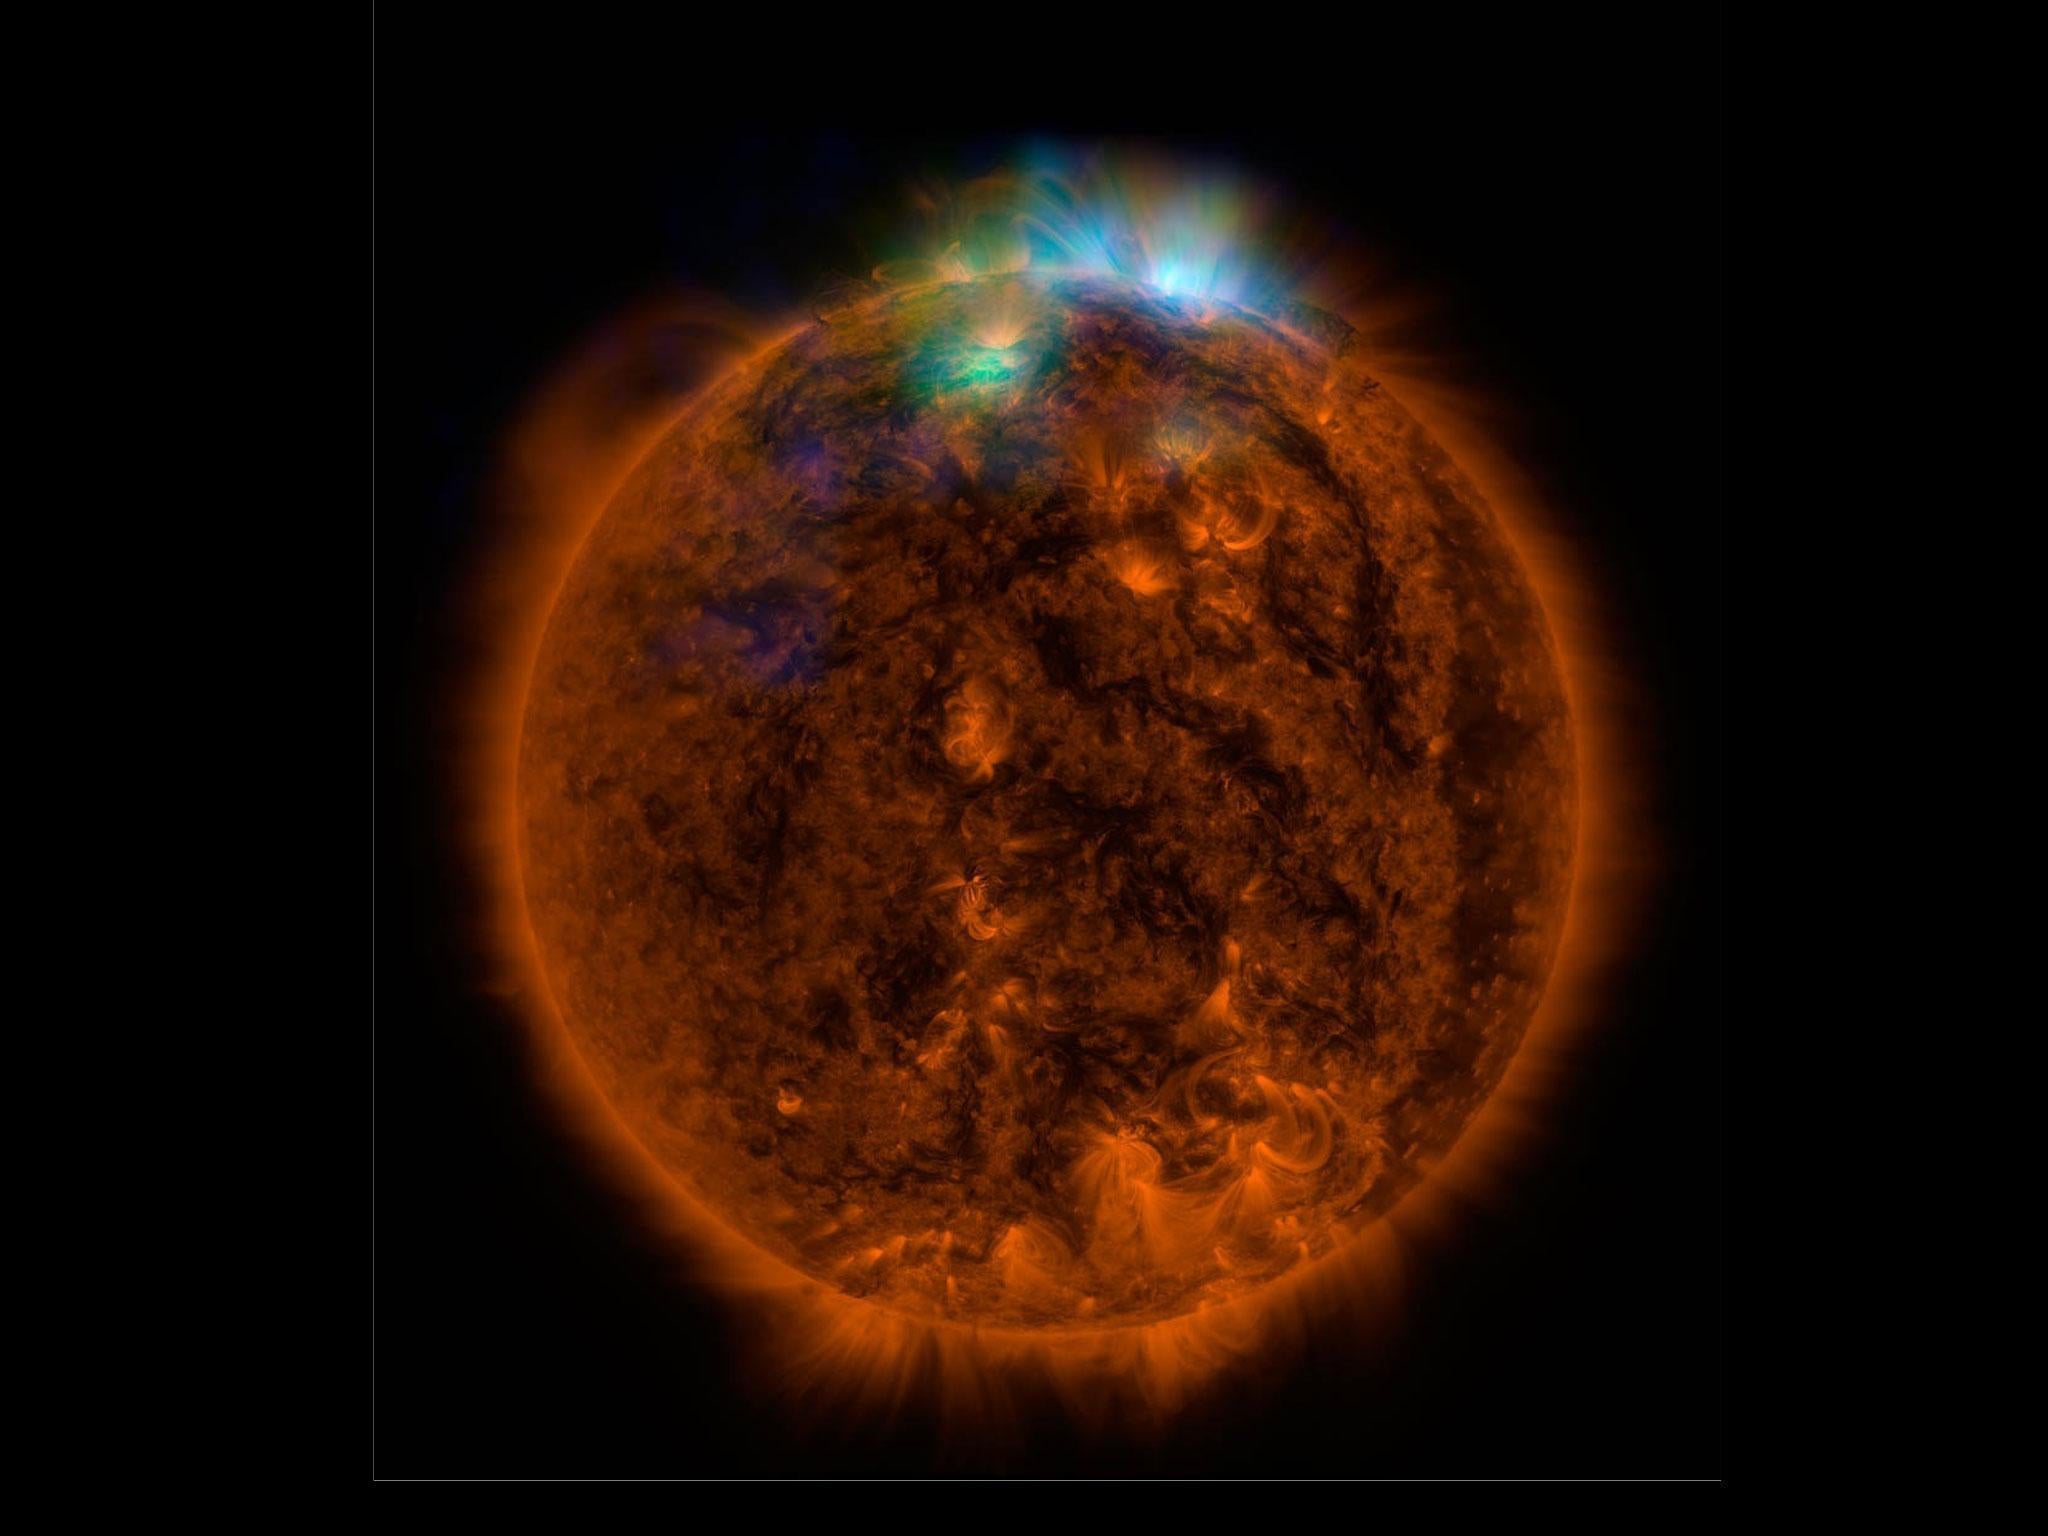 X-rays stream off the sun in this image showing observations from by NASA's Nuclear Spectroscopic Telescope Array, or NuSTAR, overlaid on a picture taken by NASA's Solar Dynamics Observatory (SDO)